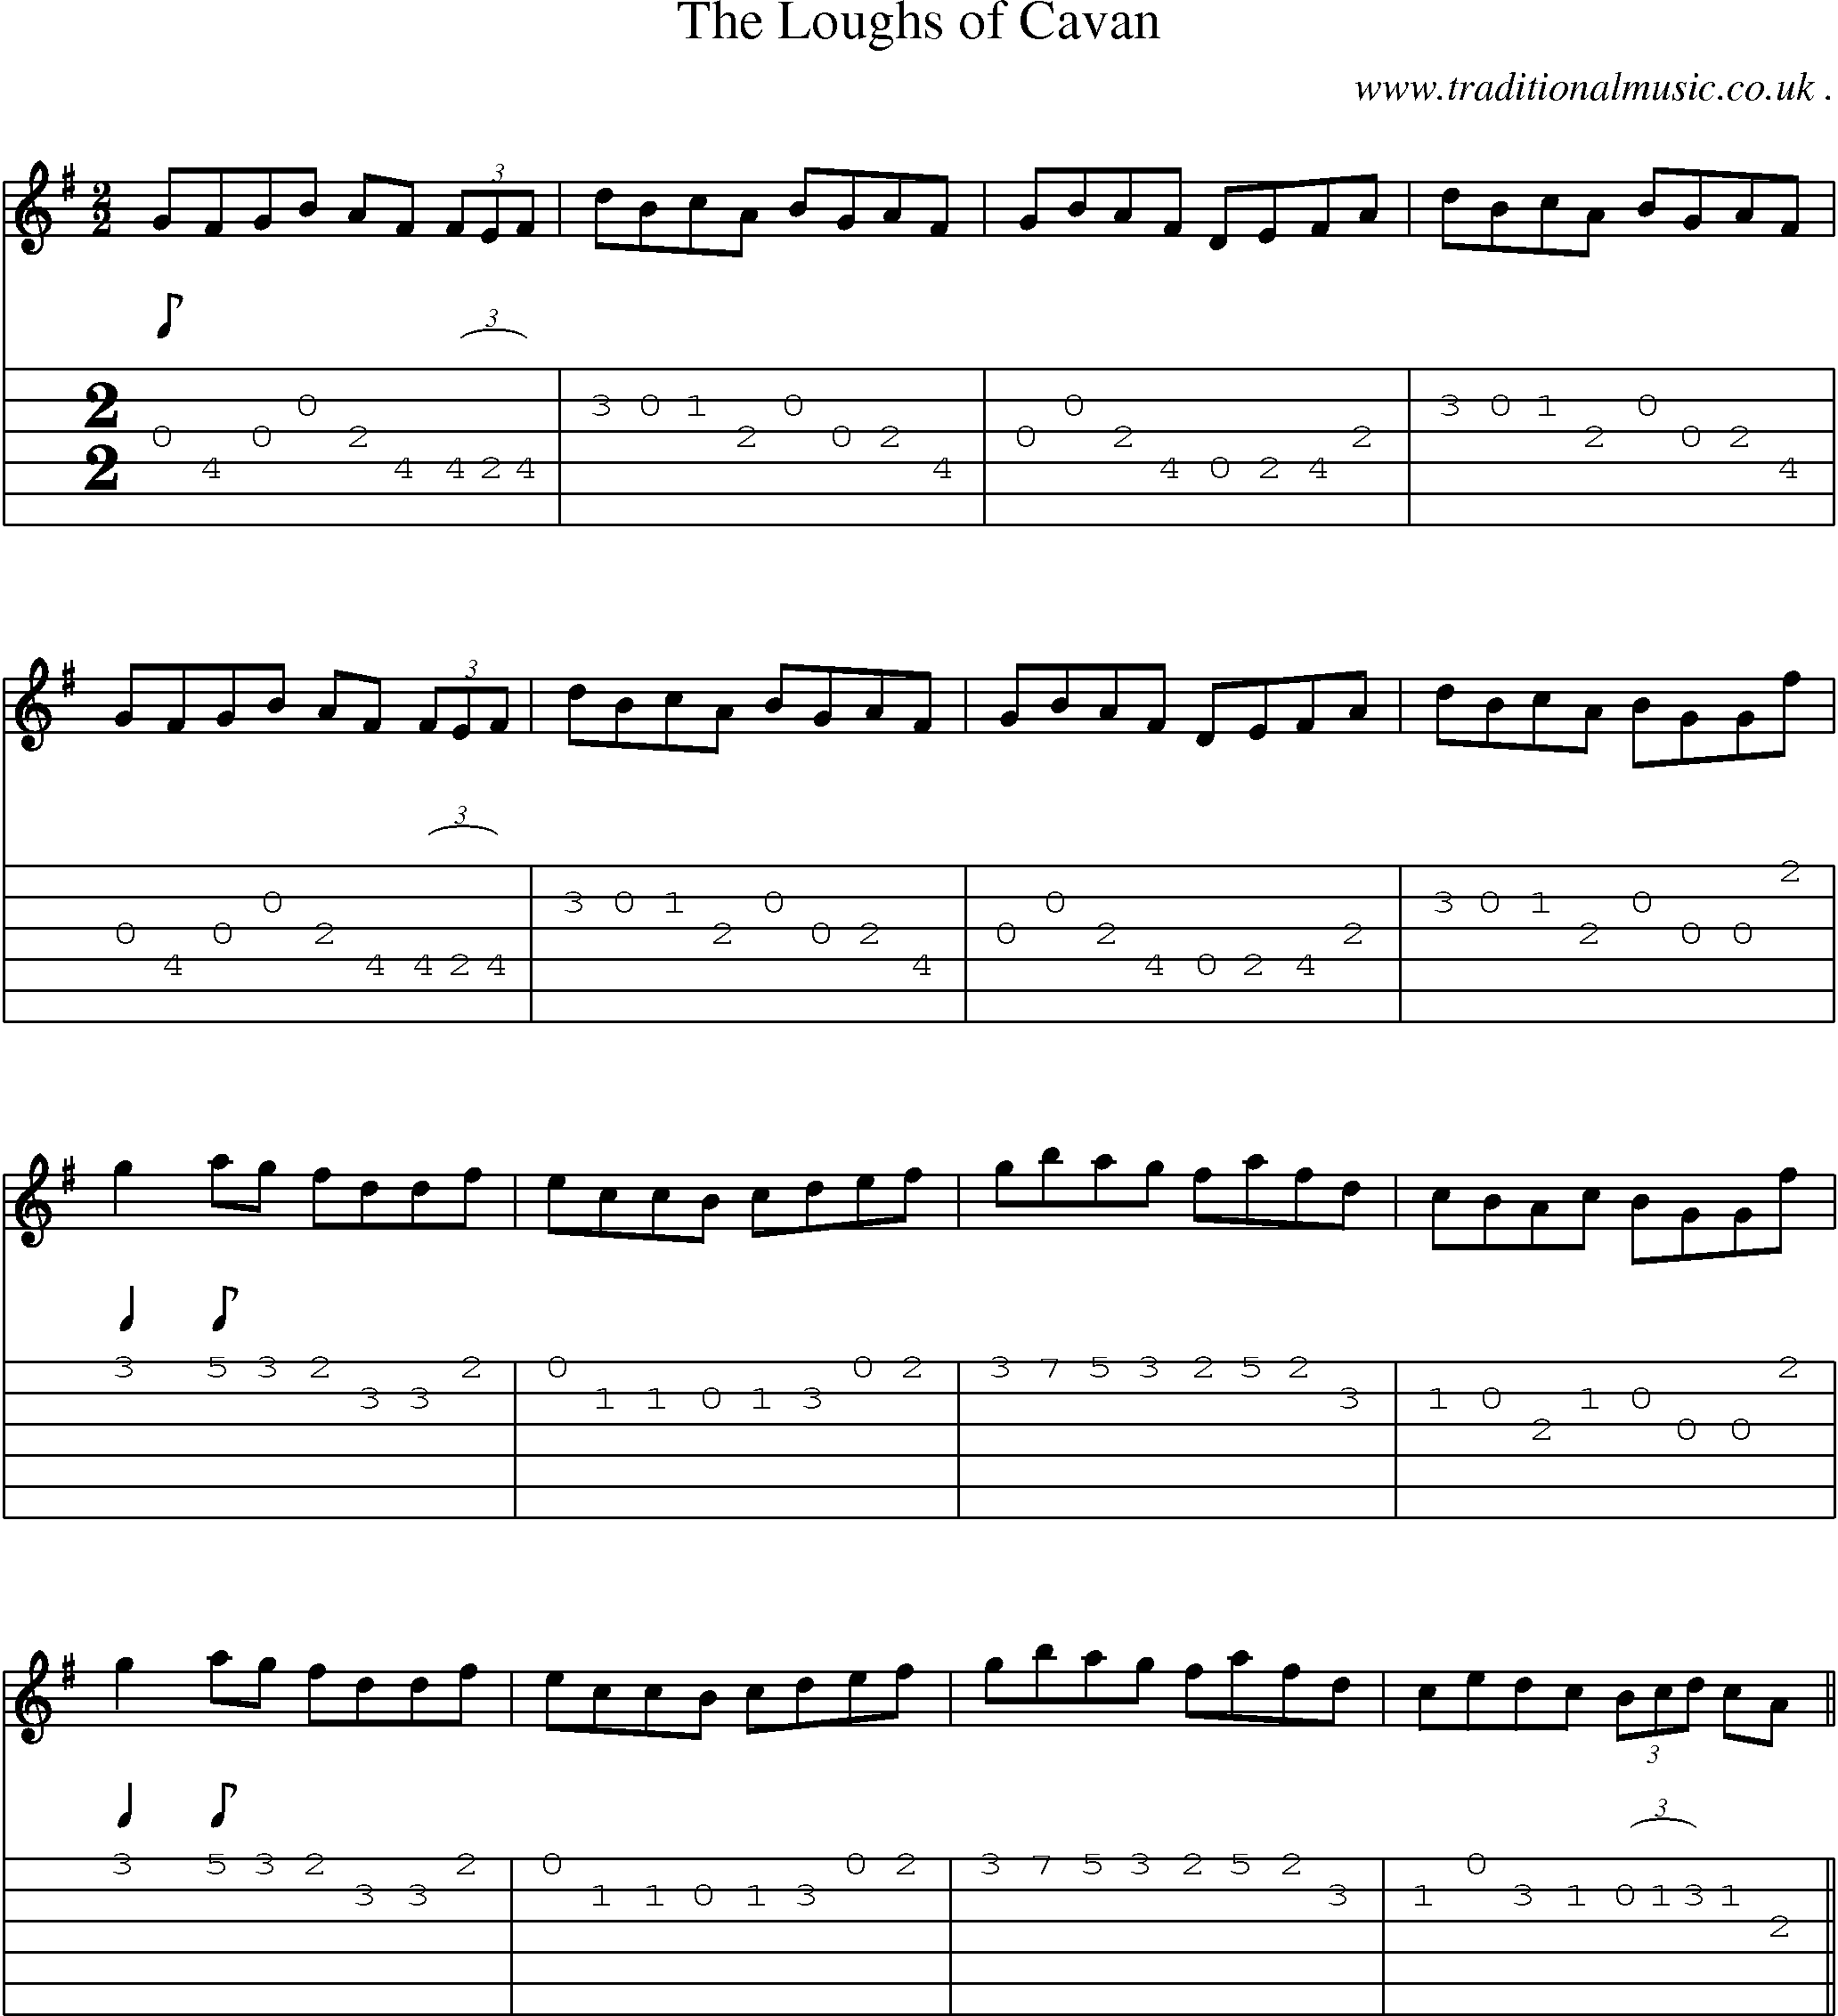 Sheet-Music and Guitar Tabs for The Loughs Of Cavan